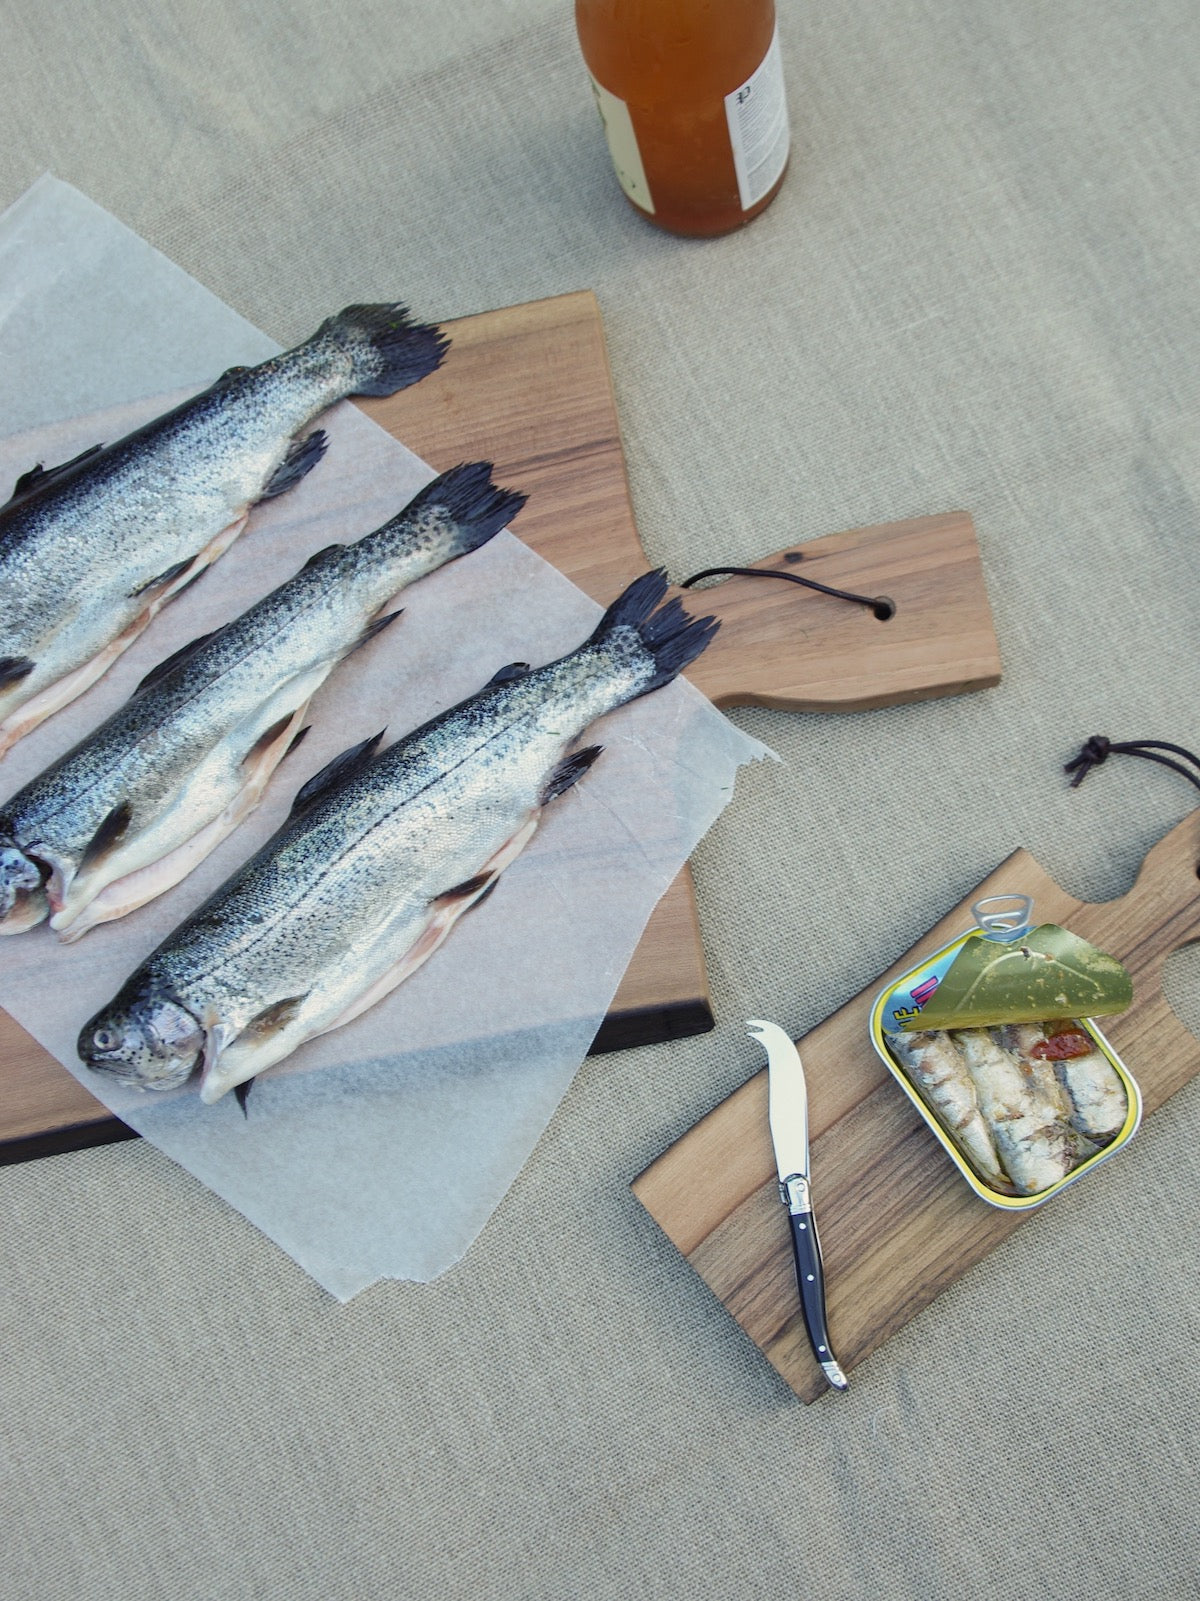 Sardines and fish on two wooden cutting boards with handles.